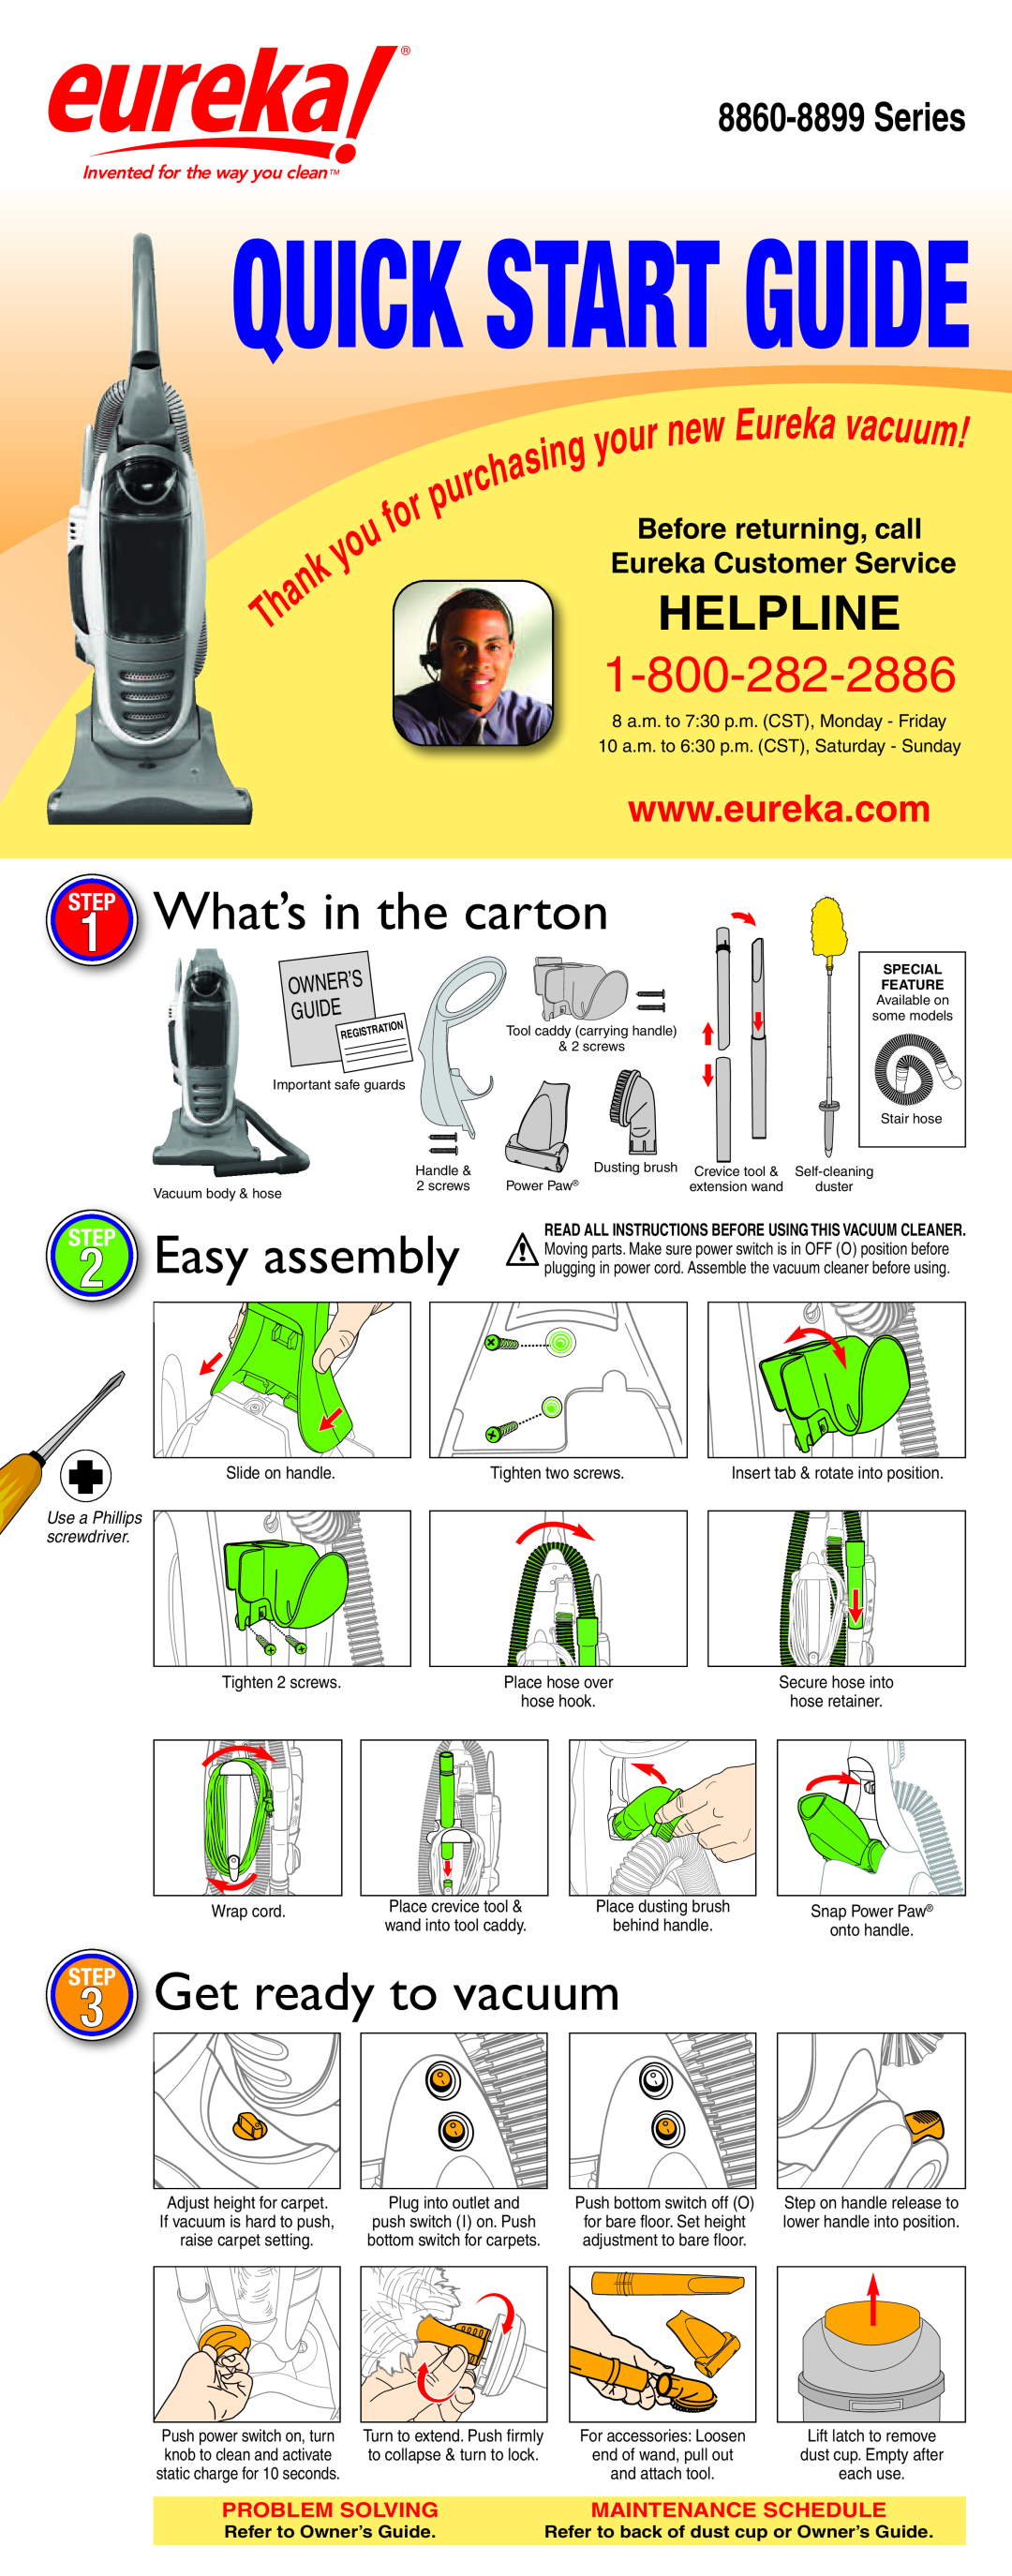 Eureka eureka quick start Quick Start Guide, What’s in the carton, Easy assembly, Get ready to vacuum, Helpline, Series 